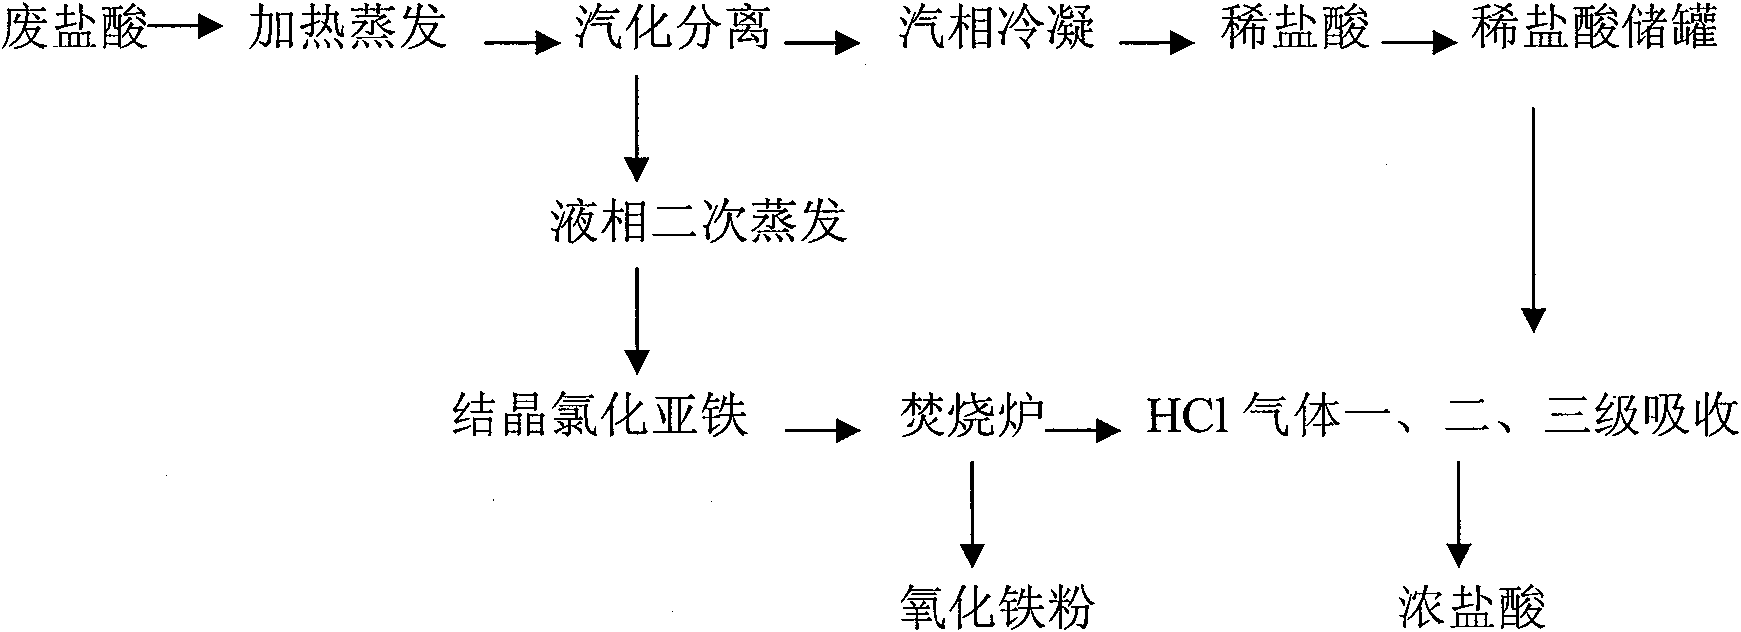 Process for recycling iron/steel acid-washing waste hydrochloric acid through evaporation burning and coupling process